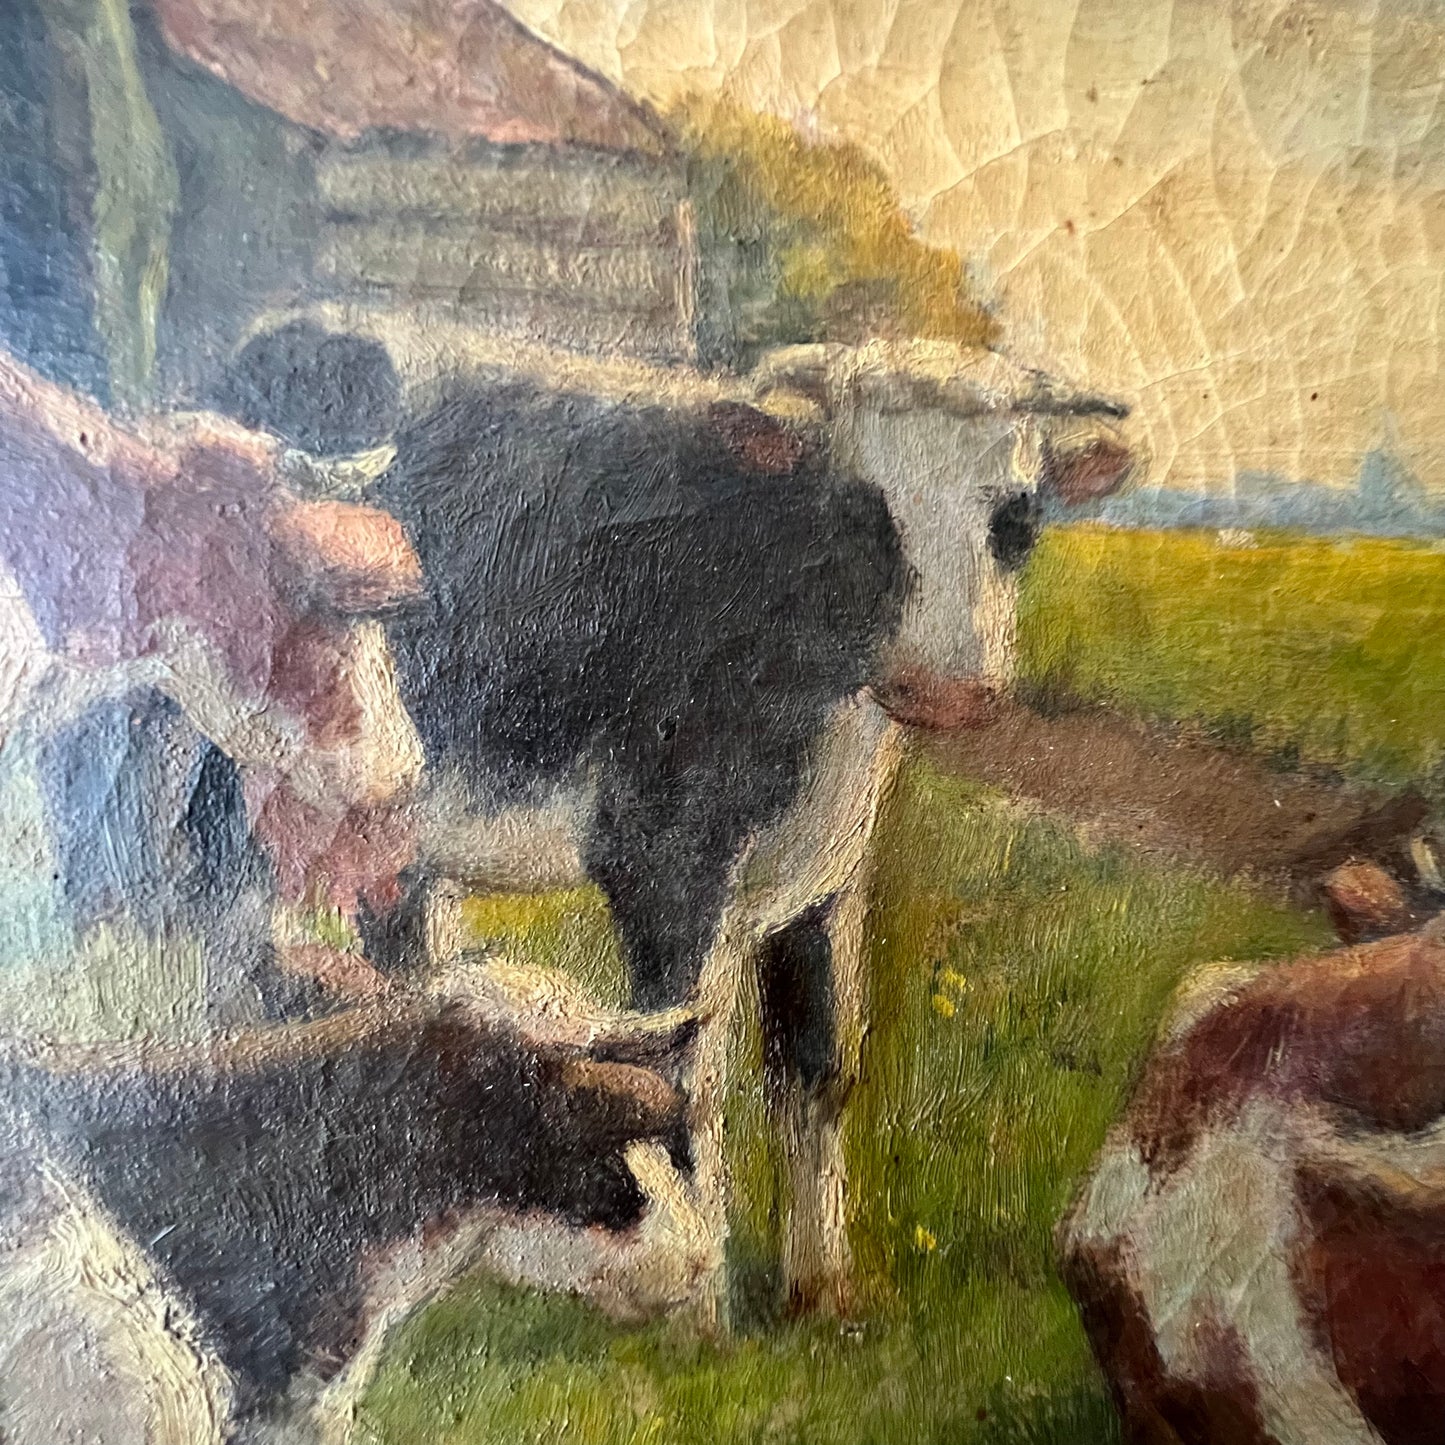 Antique Dutch Oil Painting Milking Time